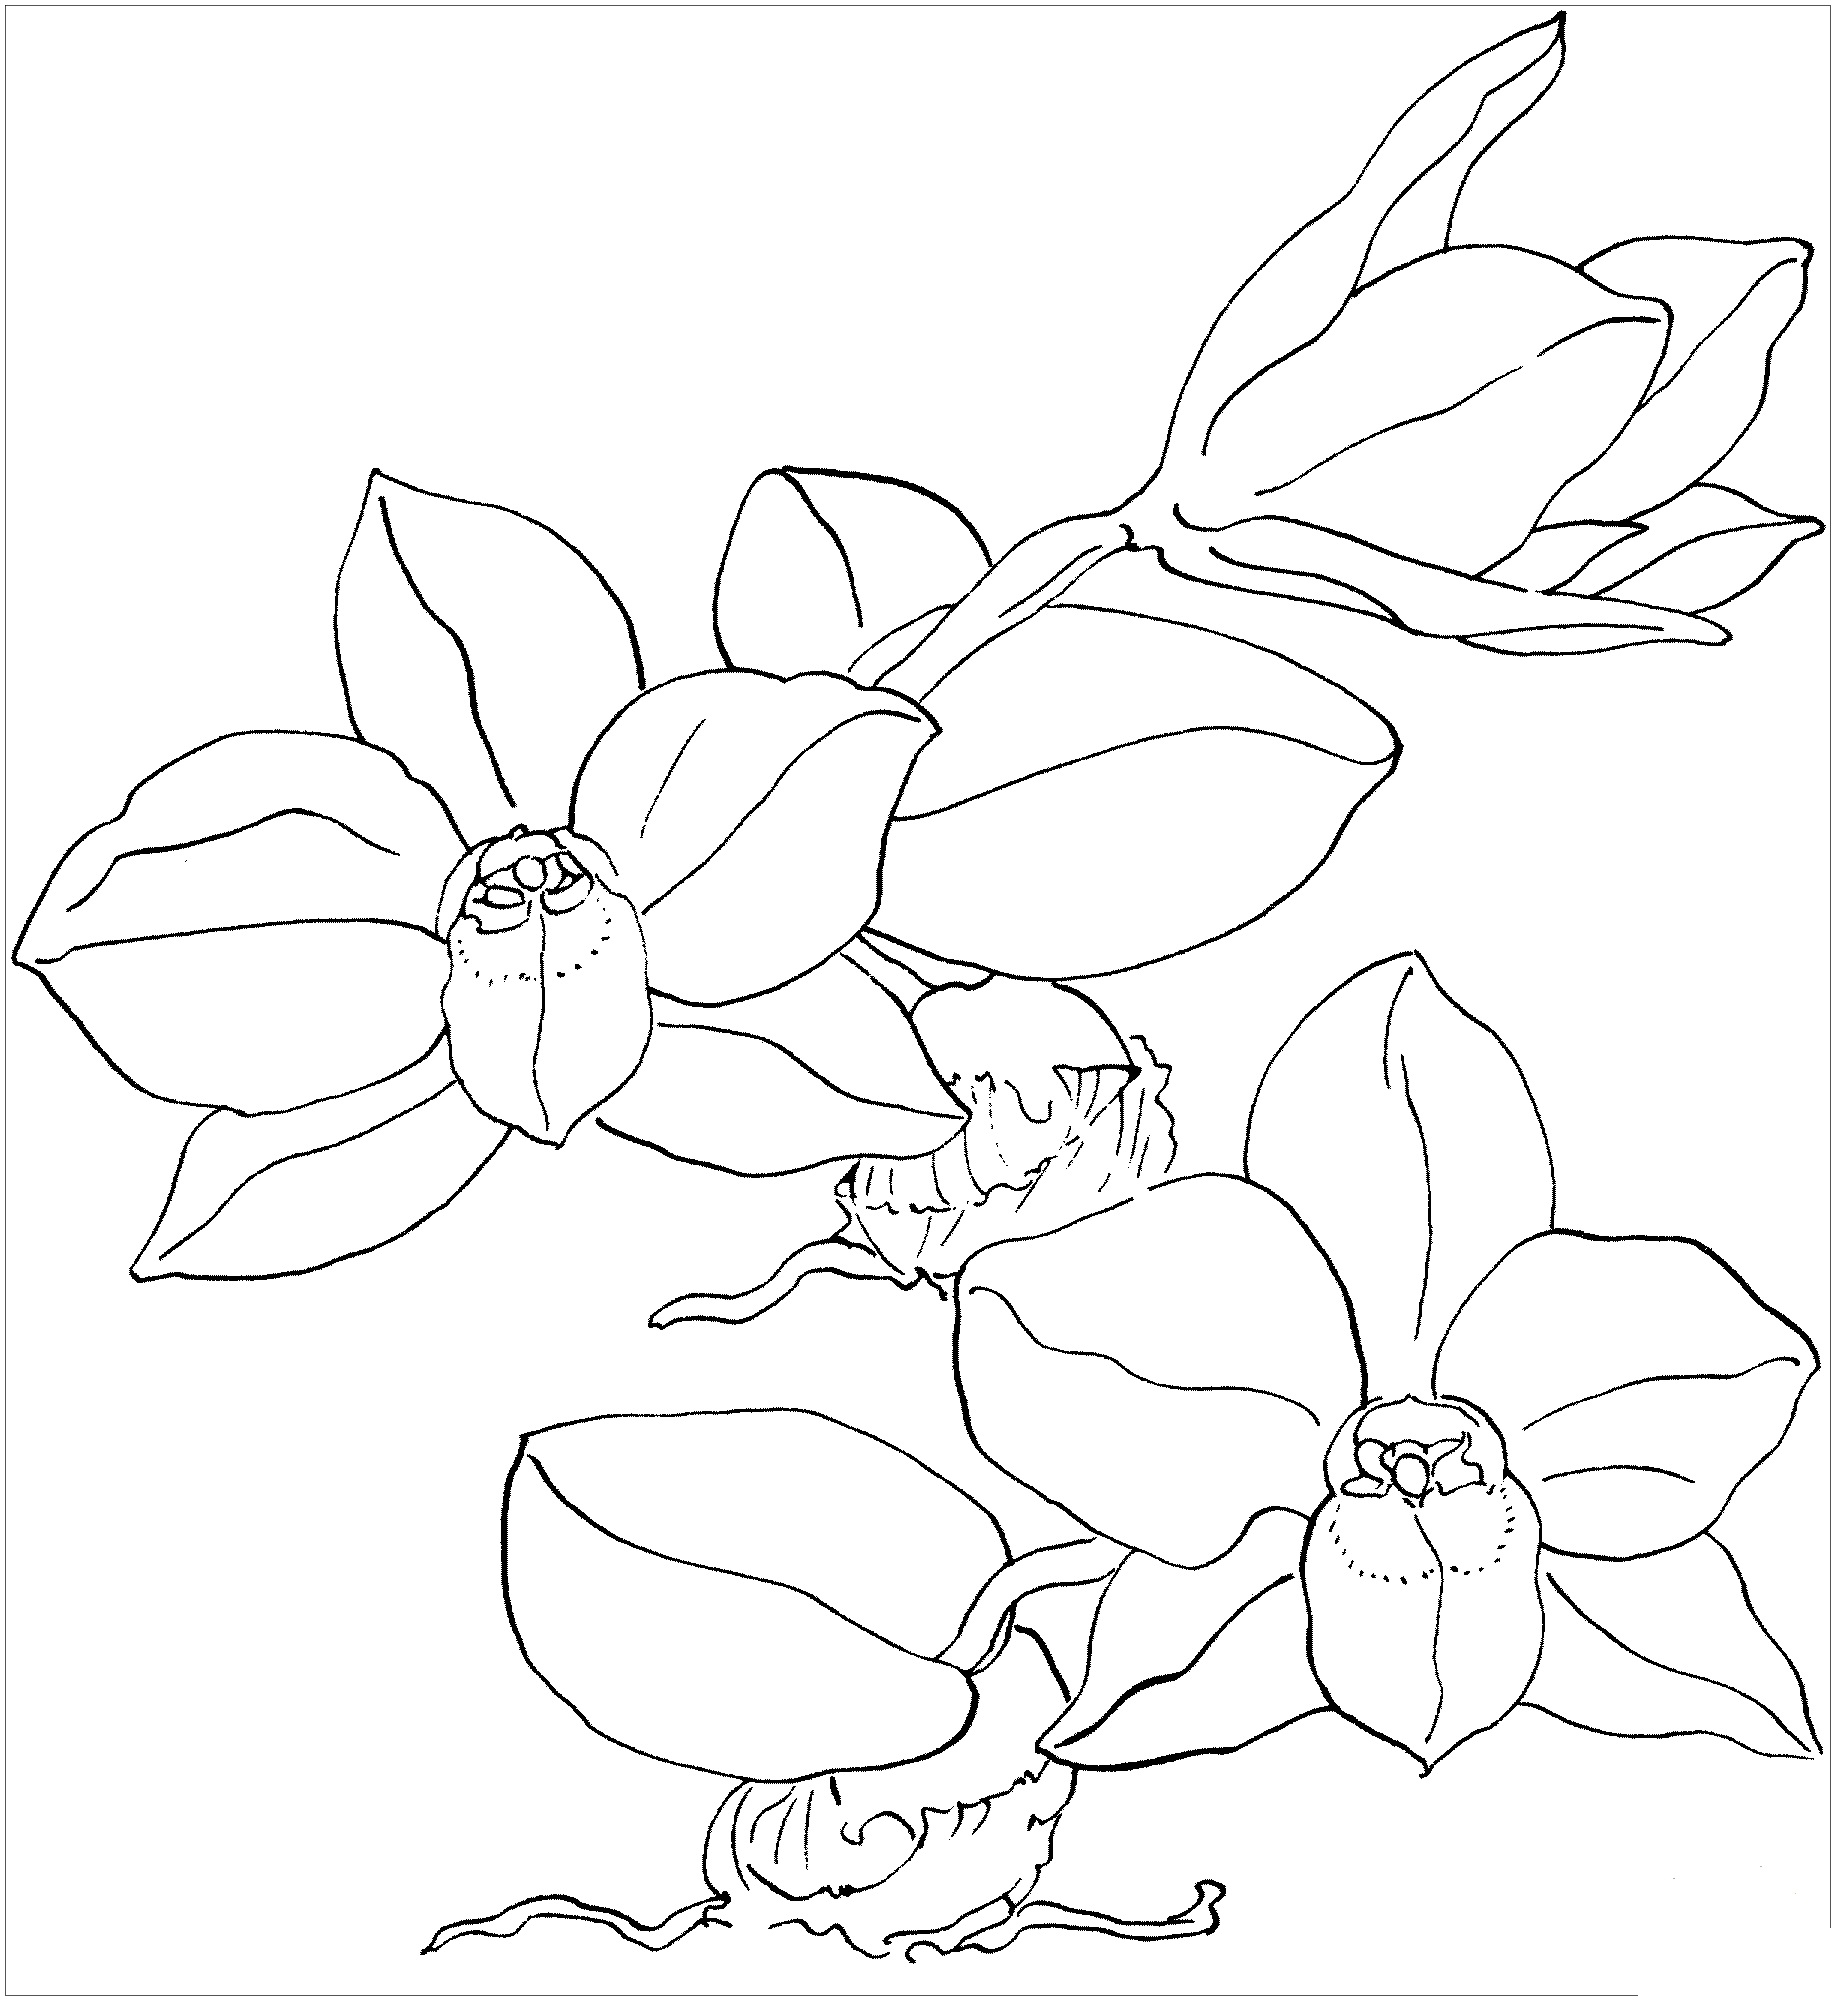 printable New Lotus Flower For kids Coloring Page